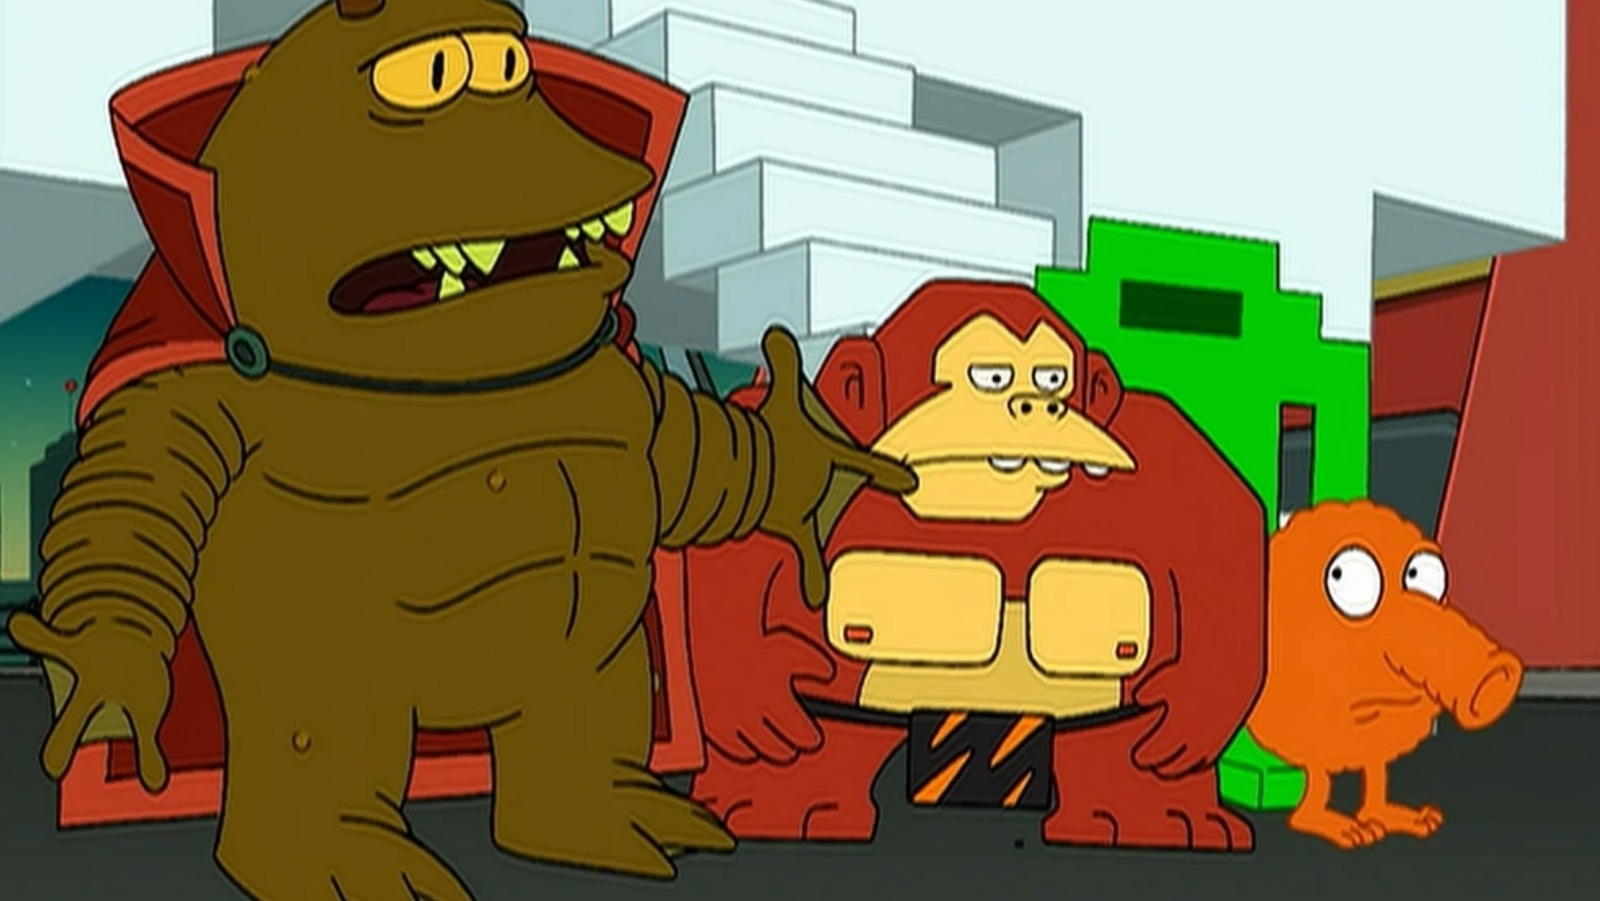 How Futurama Pulled Off Raiders Of The Lost Arcade (And Avoided Getting Sued)